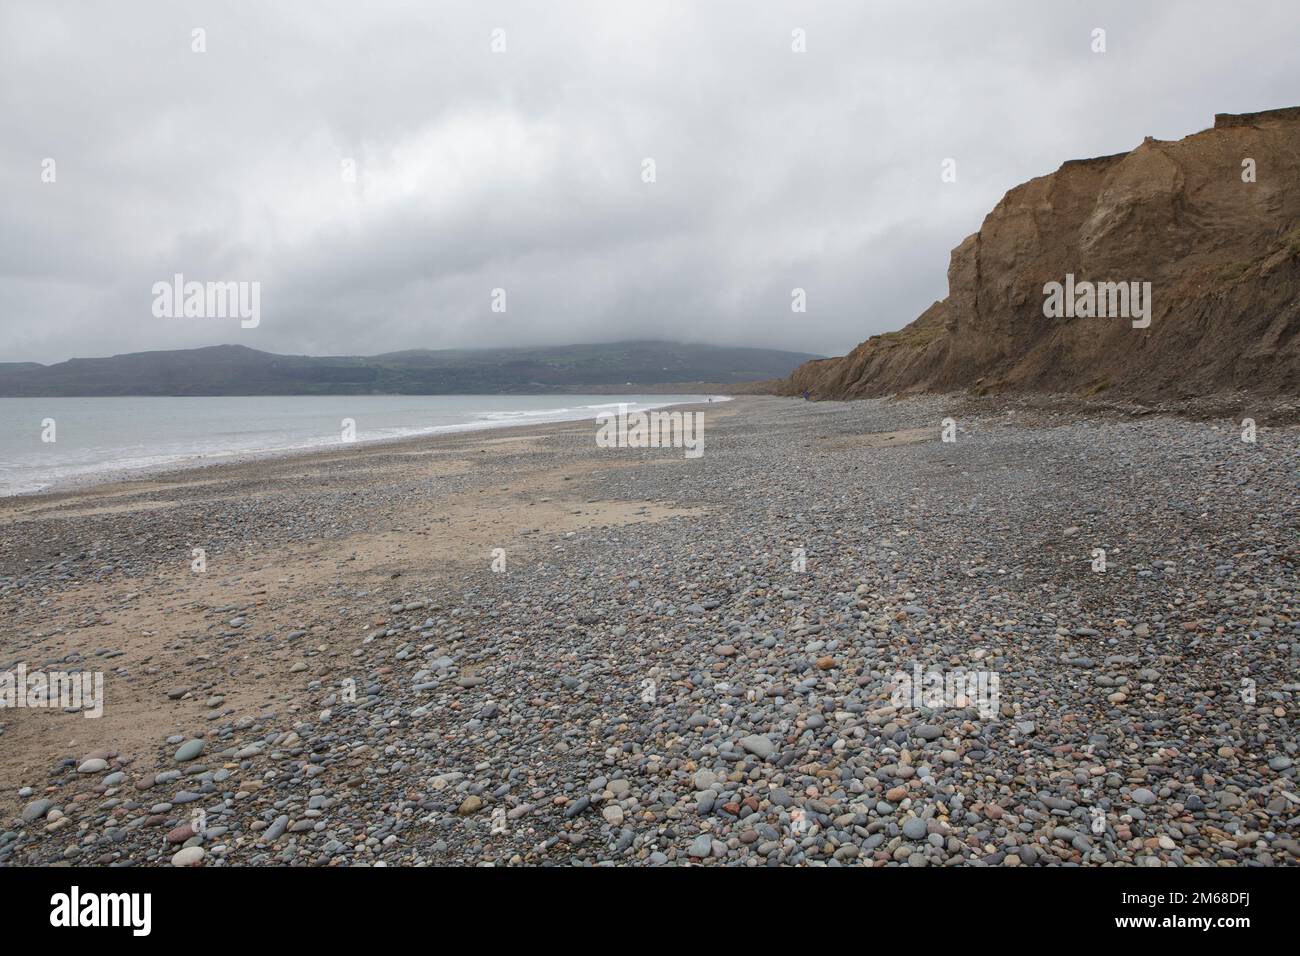 The beach at Porth Neigwl (Hells Mouth) on the Llyn Peninsula Stock Photo